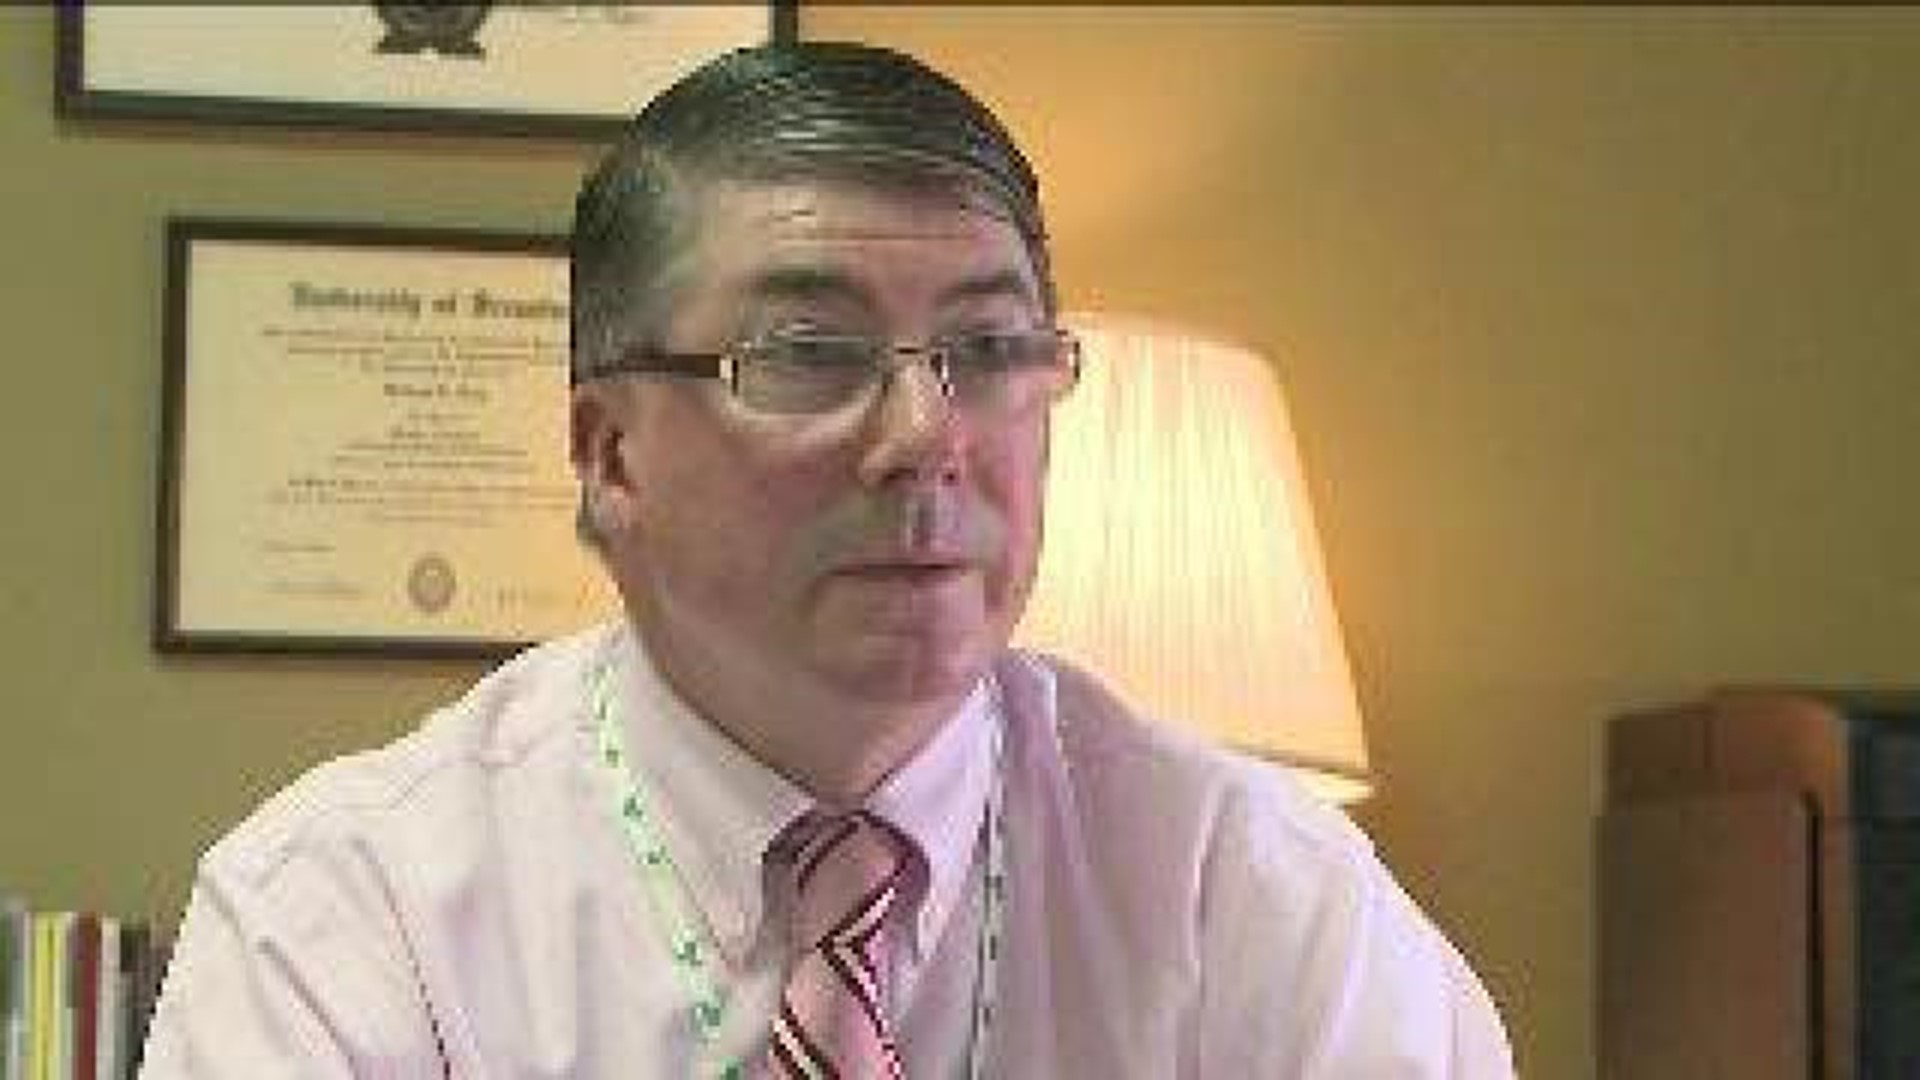 Parents, Students React To Superintendent’s Resignation